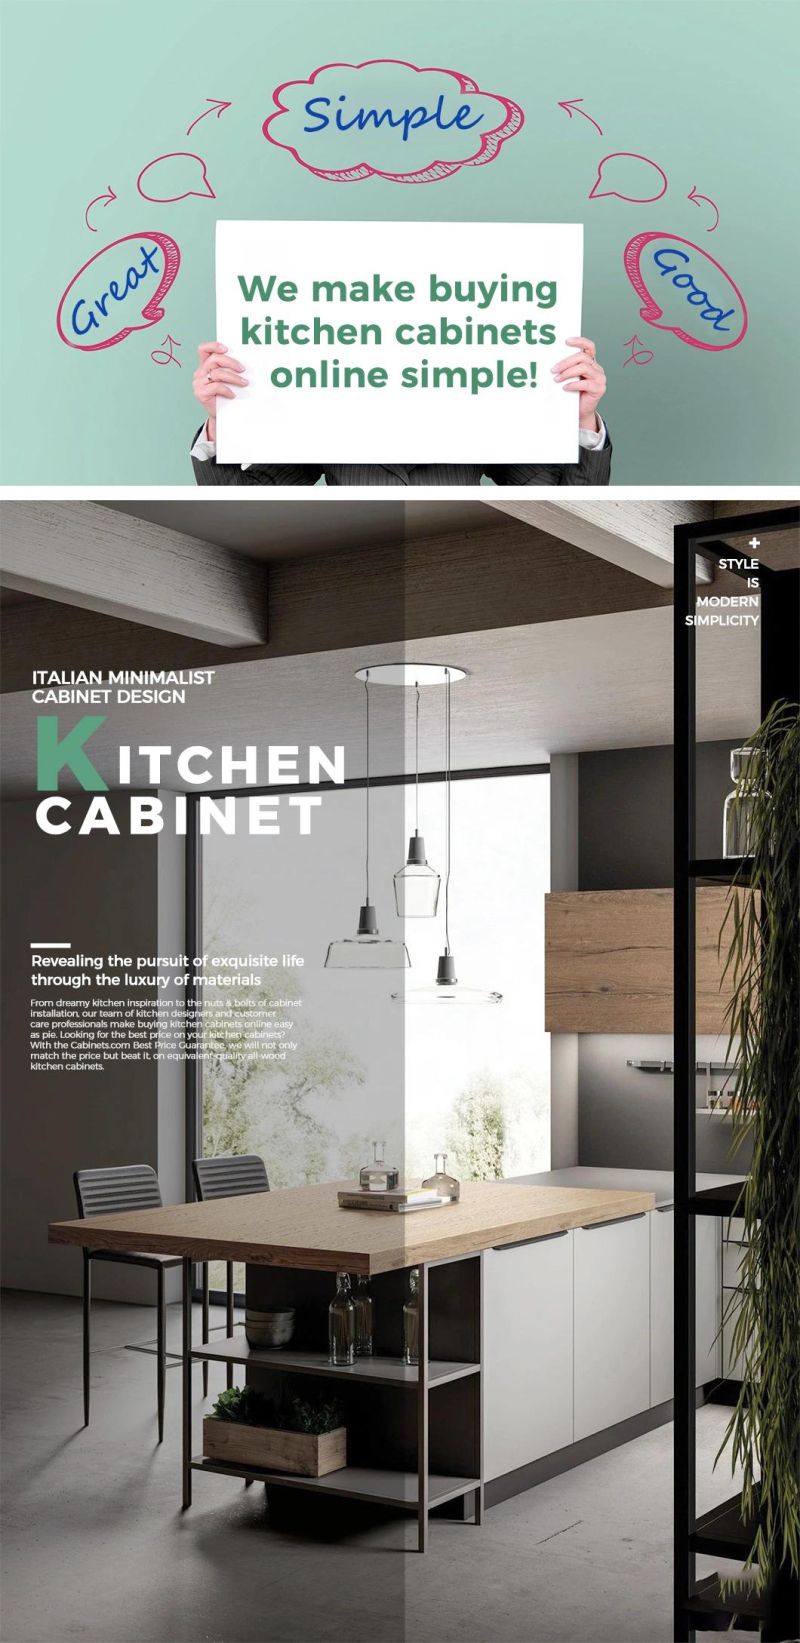 Modern Home Furniture Hanging White Lacquer Kitchen Cabinet